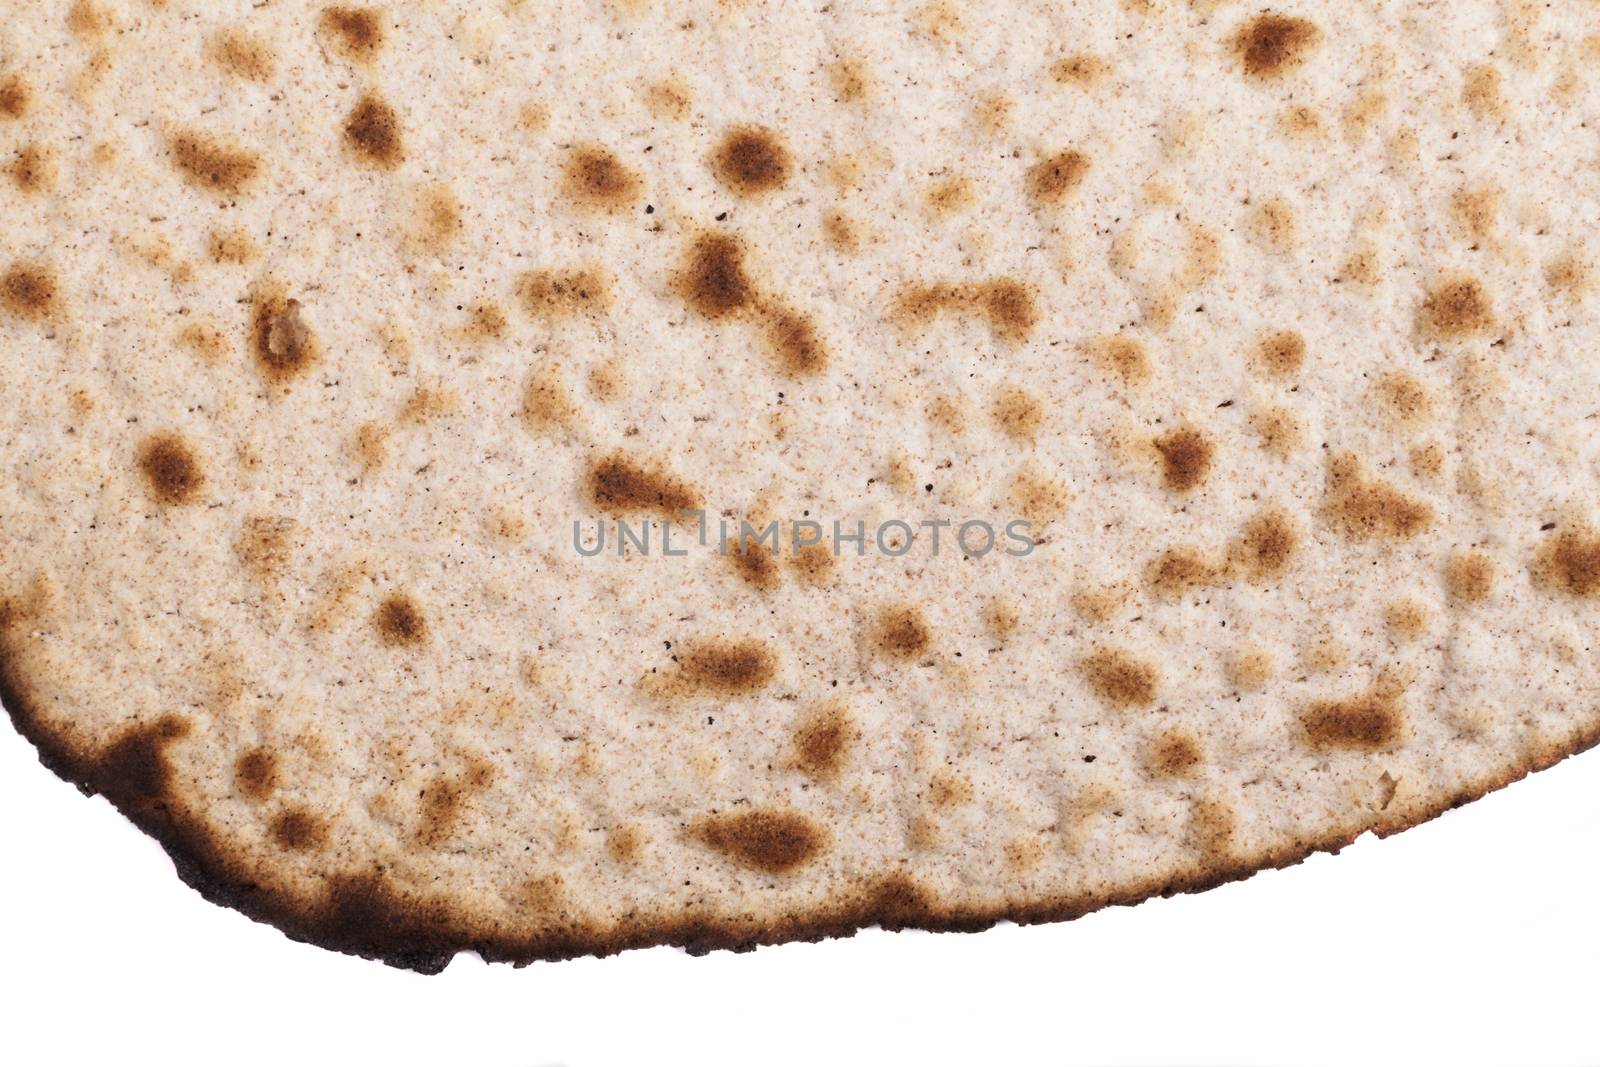 Round Matza Close-up by orcearo